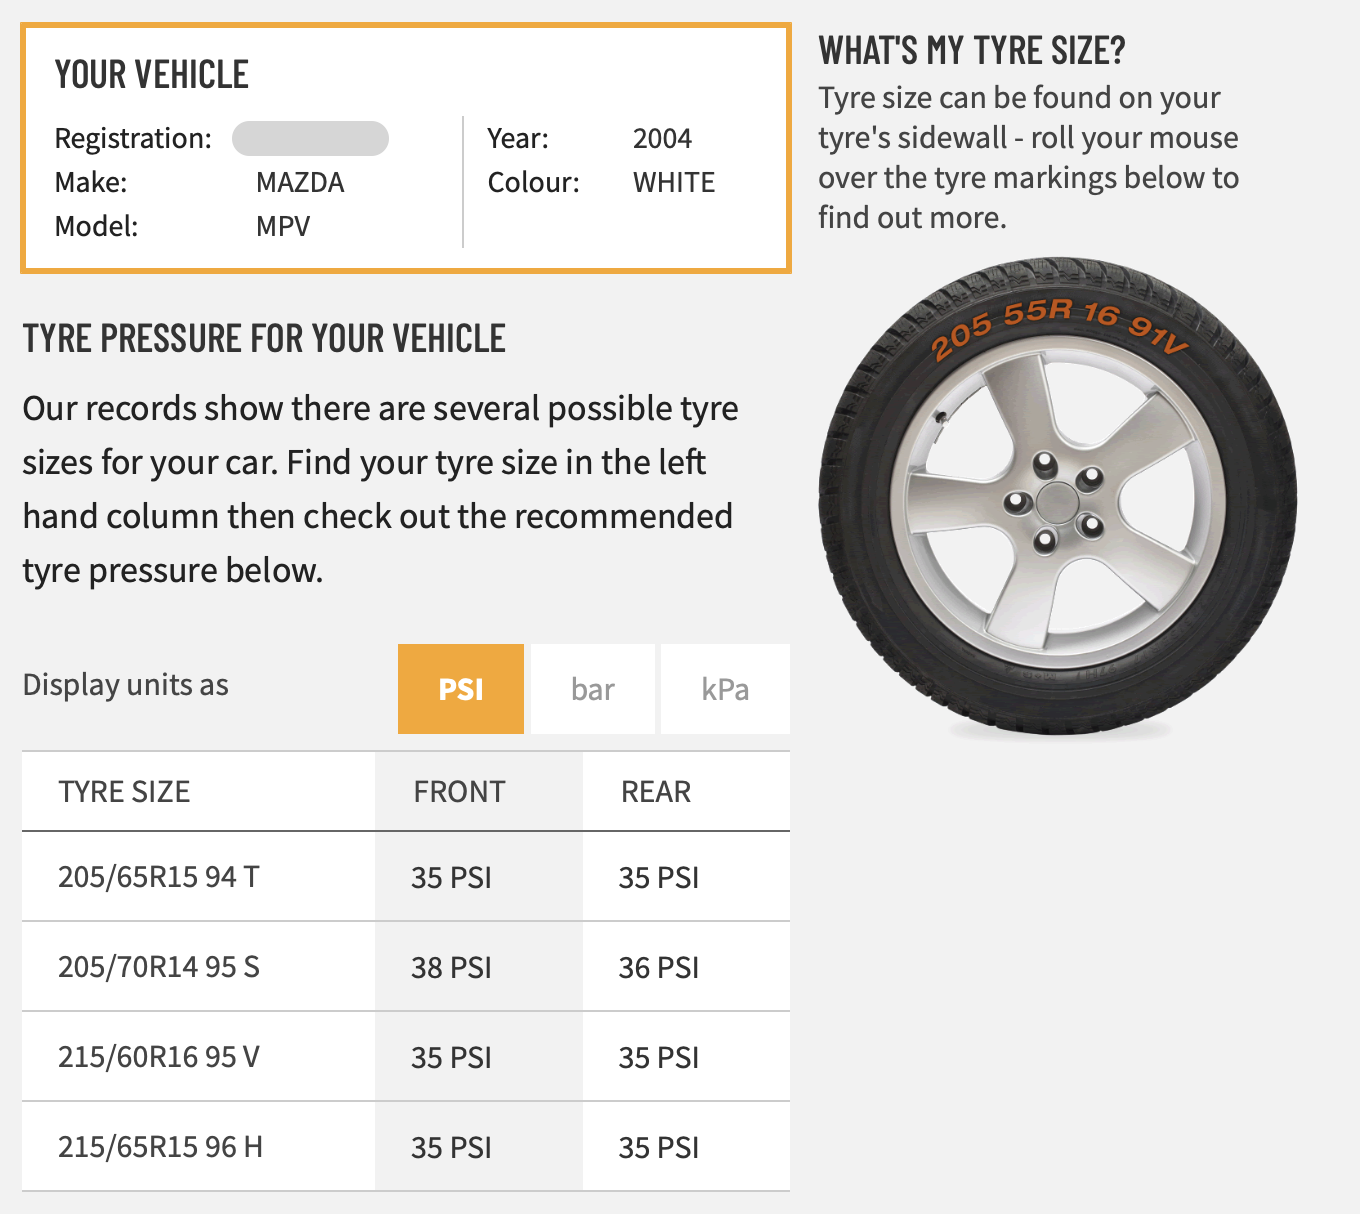 SCreenshot for my car showing various tire sizes and recommended pressures. 